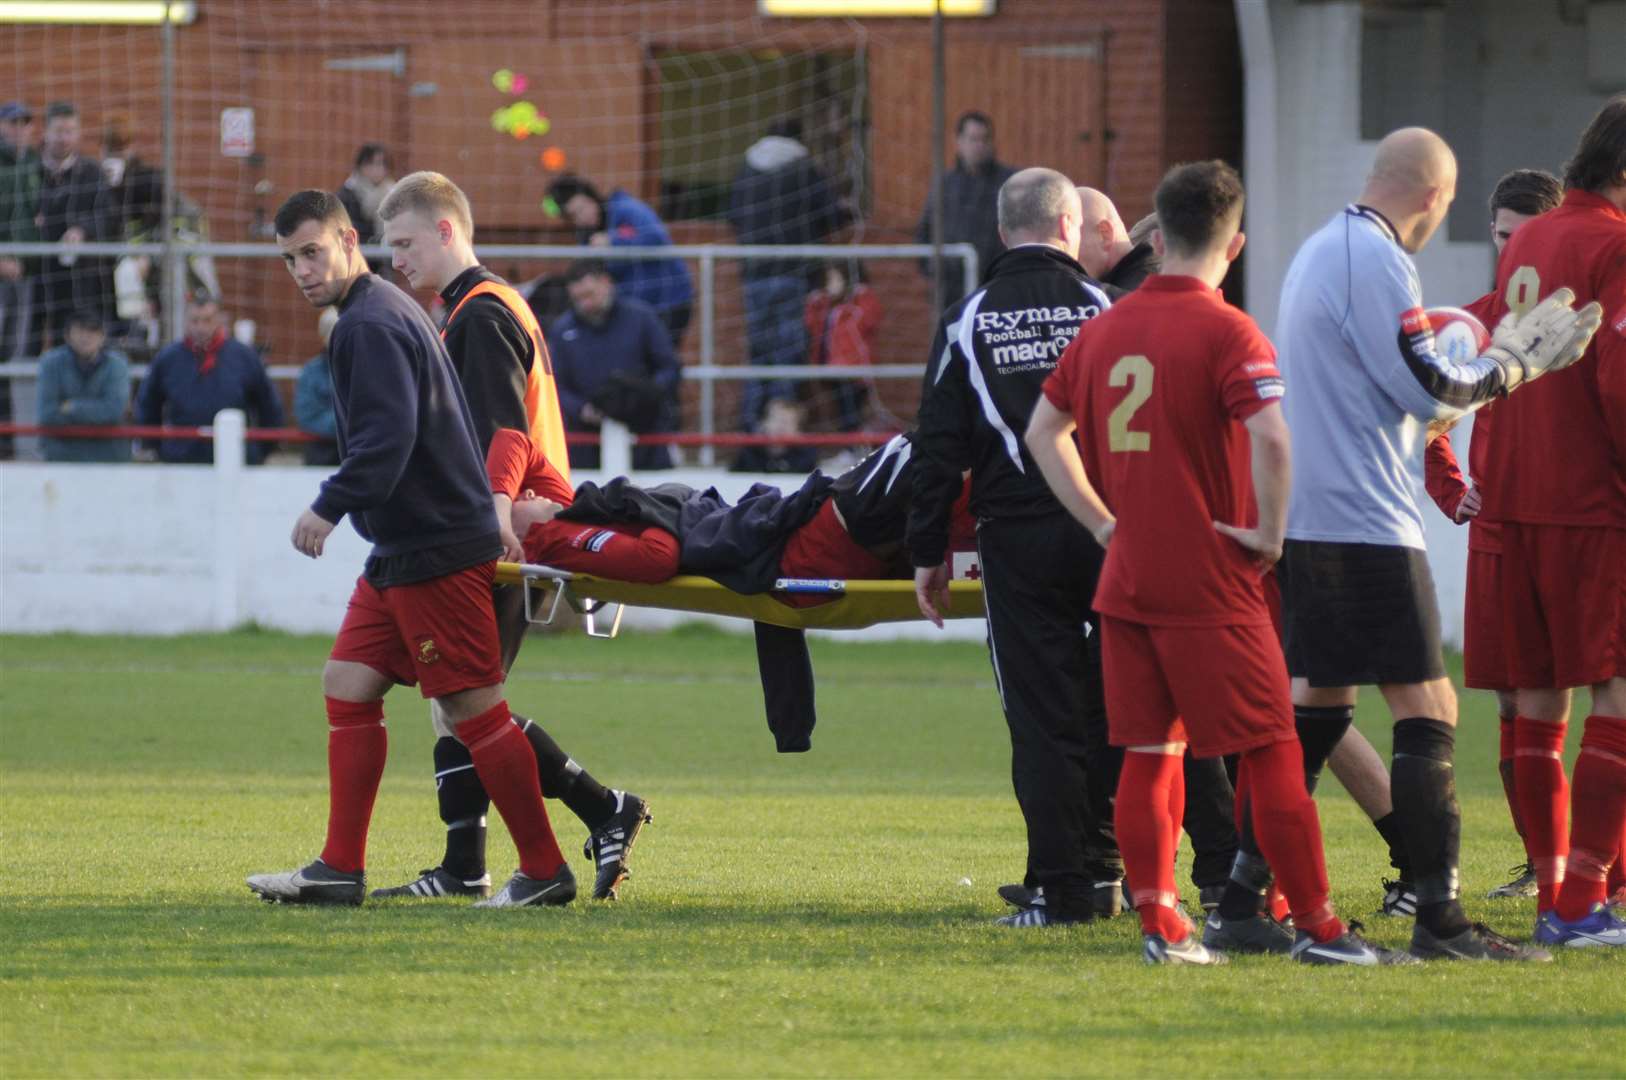 Luke Wheatley is stretchered off during a match in 2012 Picture: Paul Amos